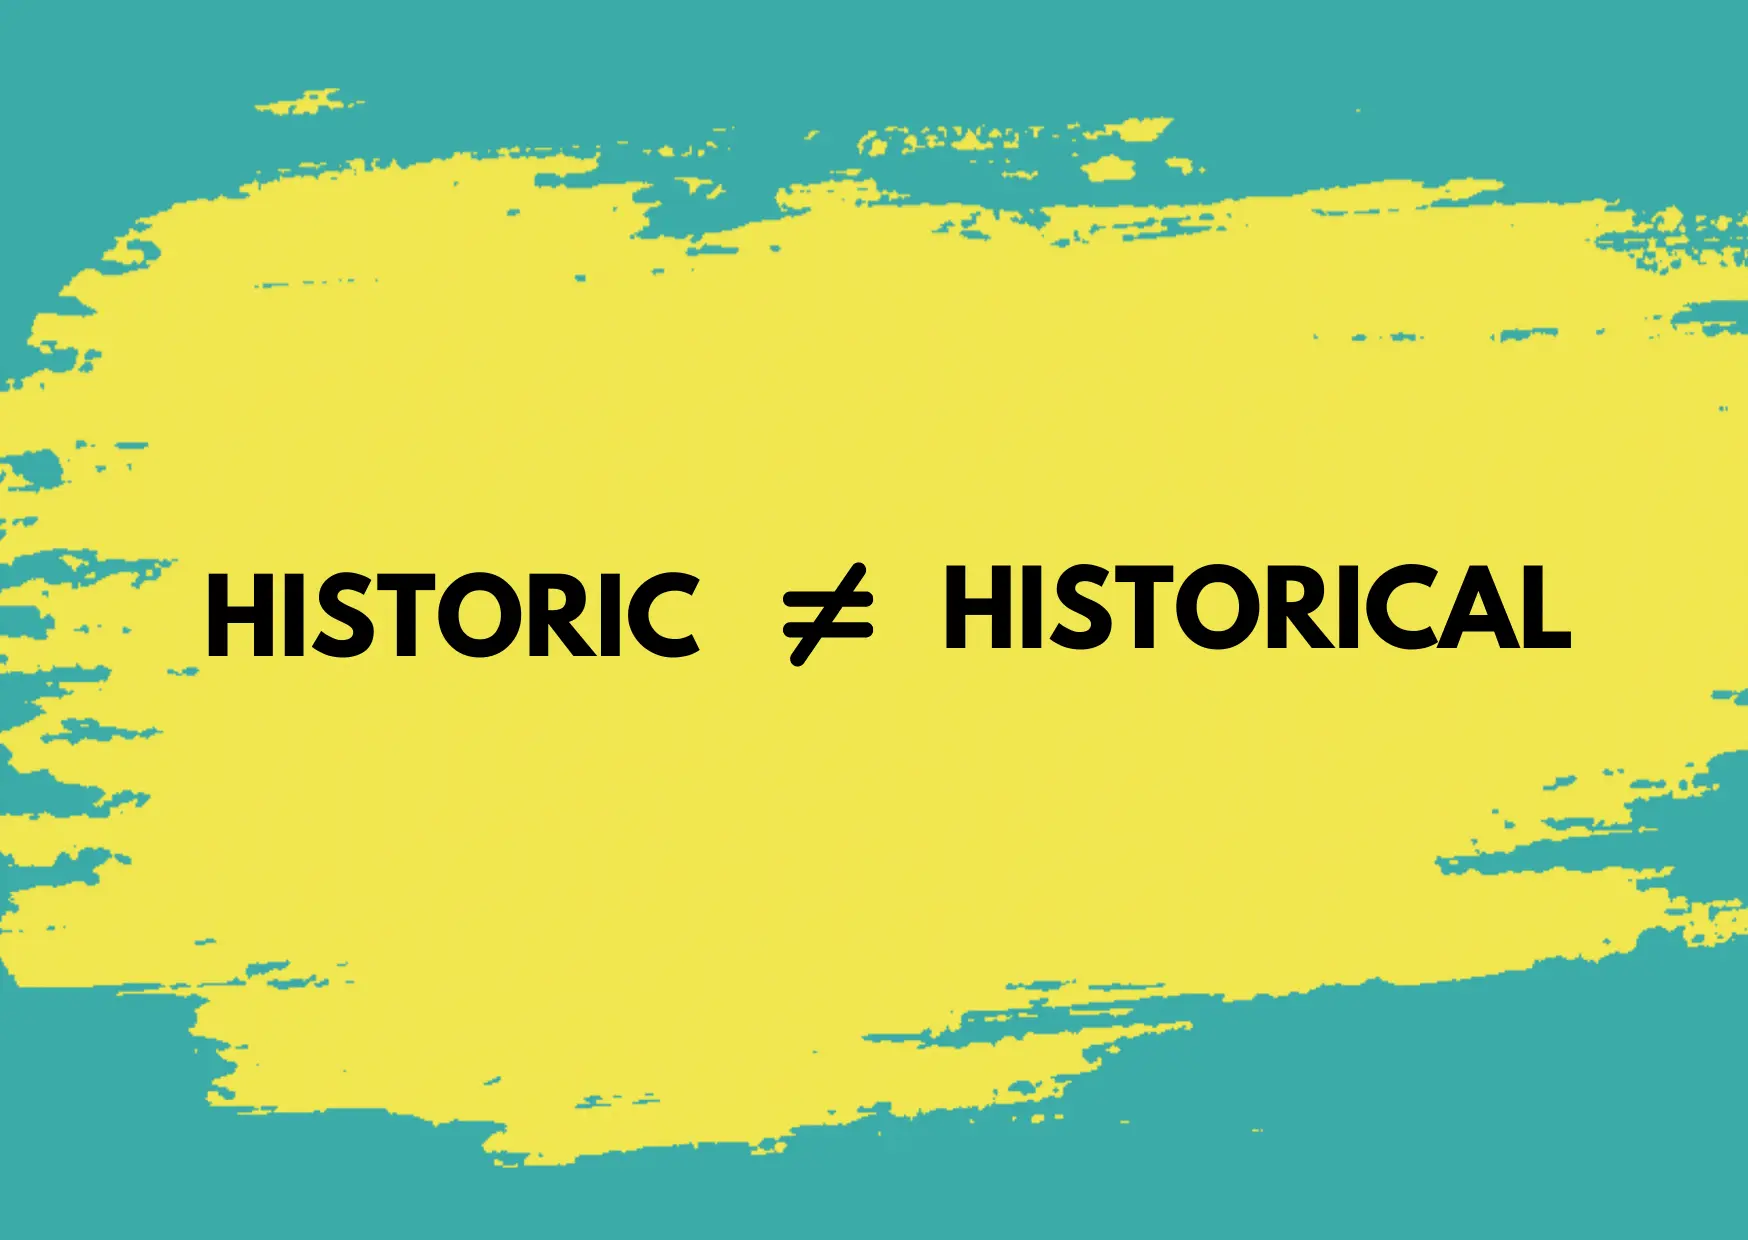 Yellow and Green background with the words "Historic ≠ Historical